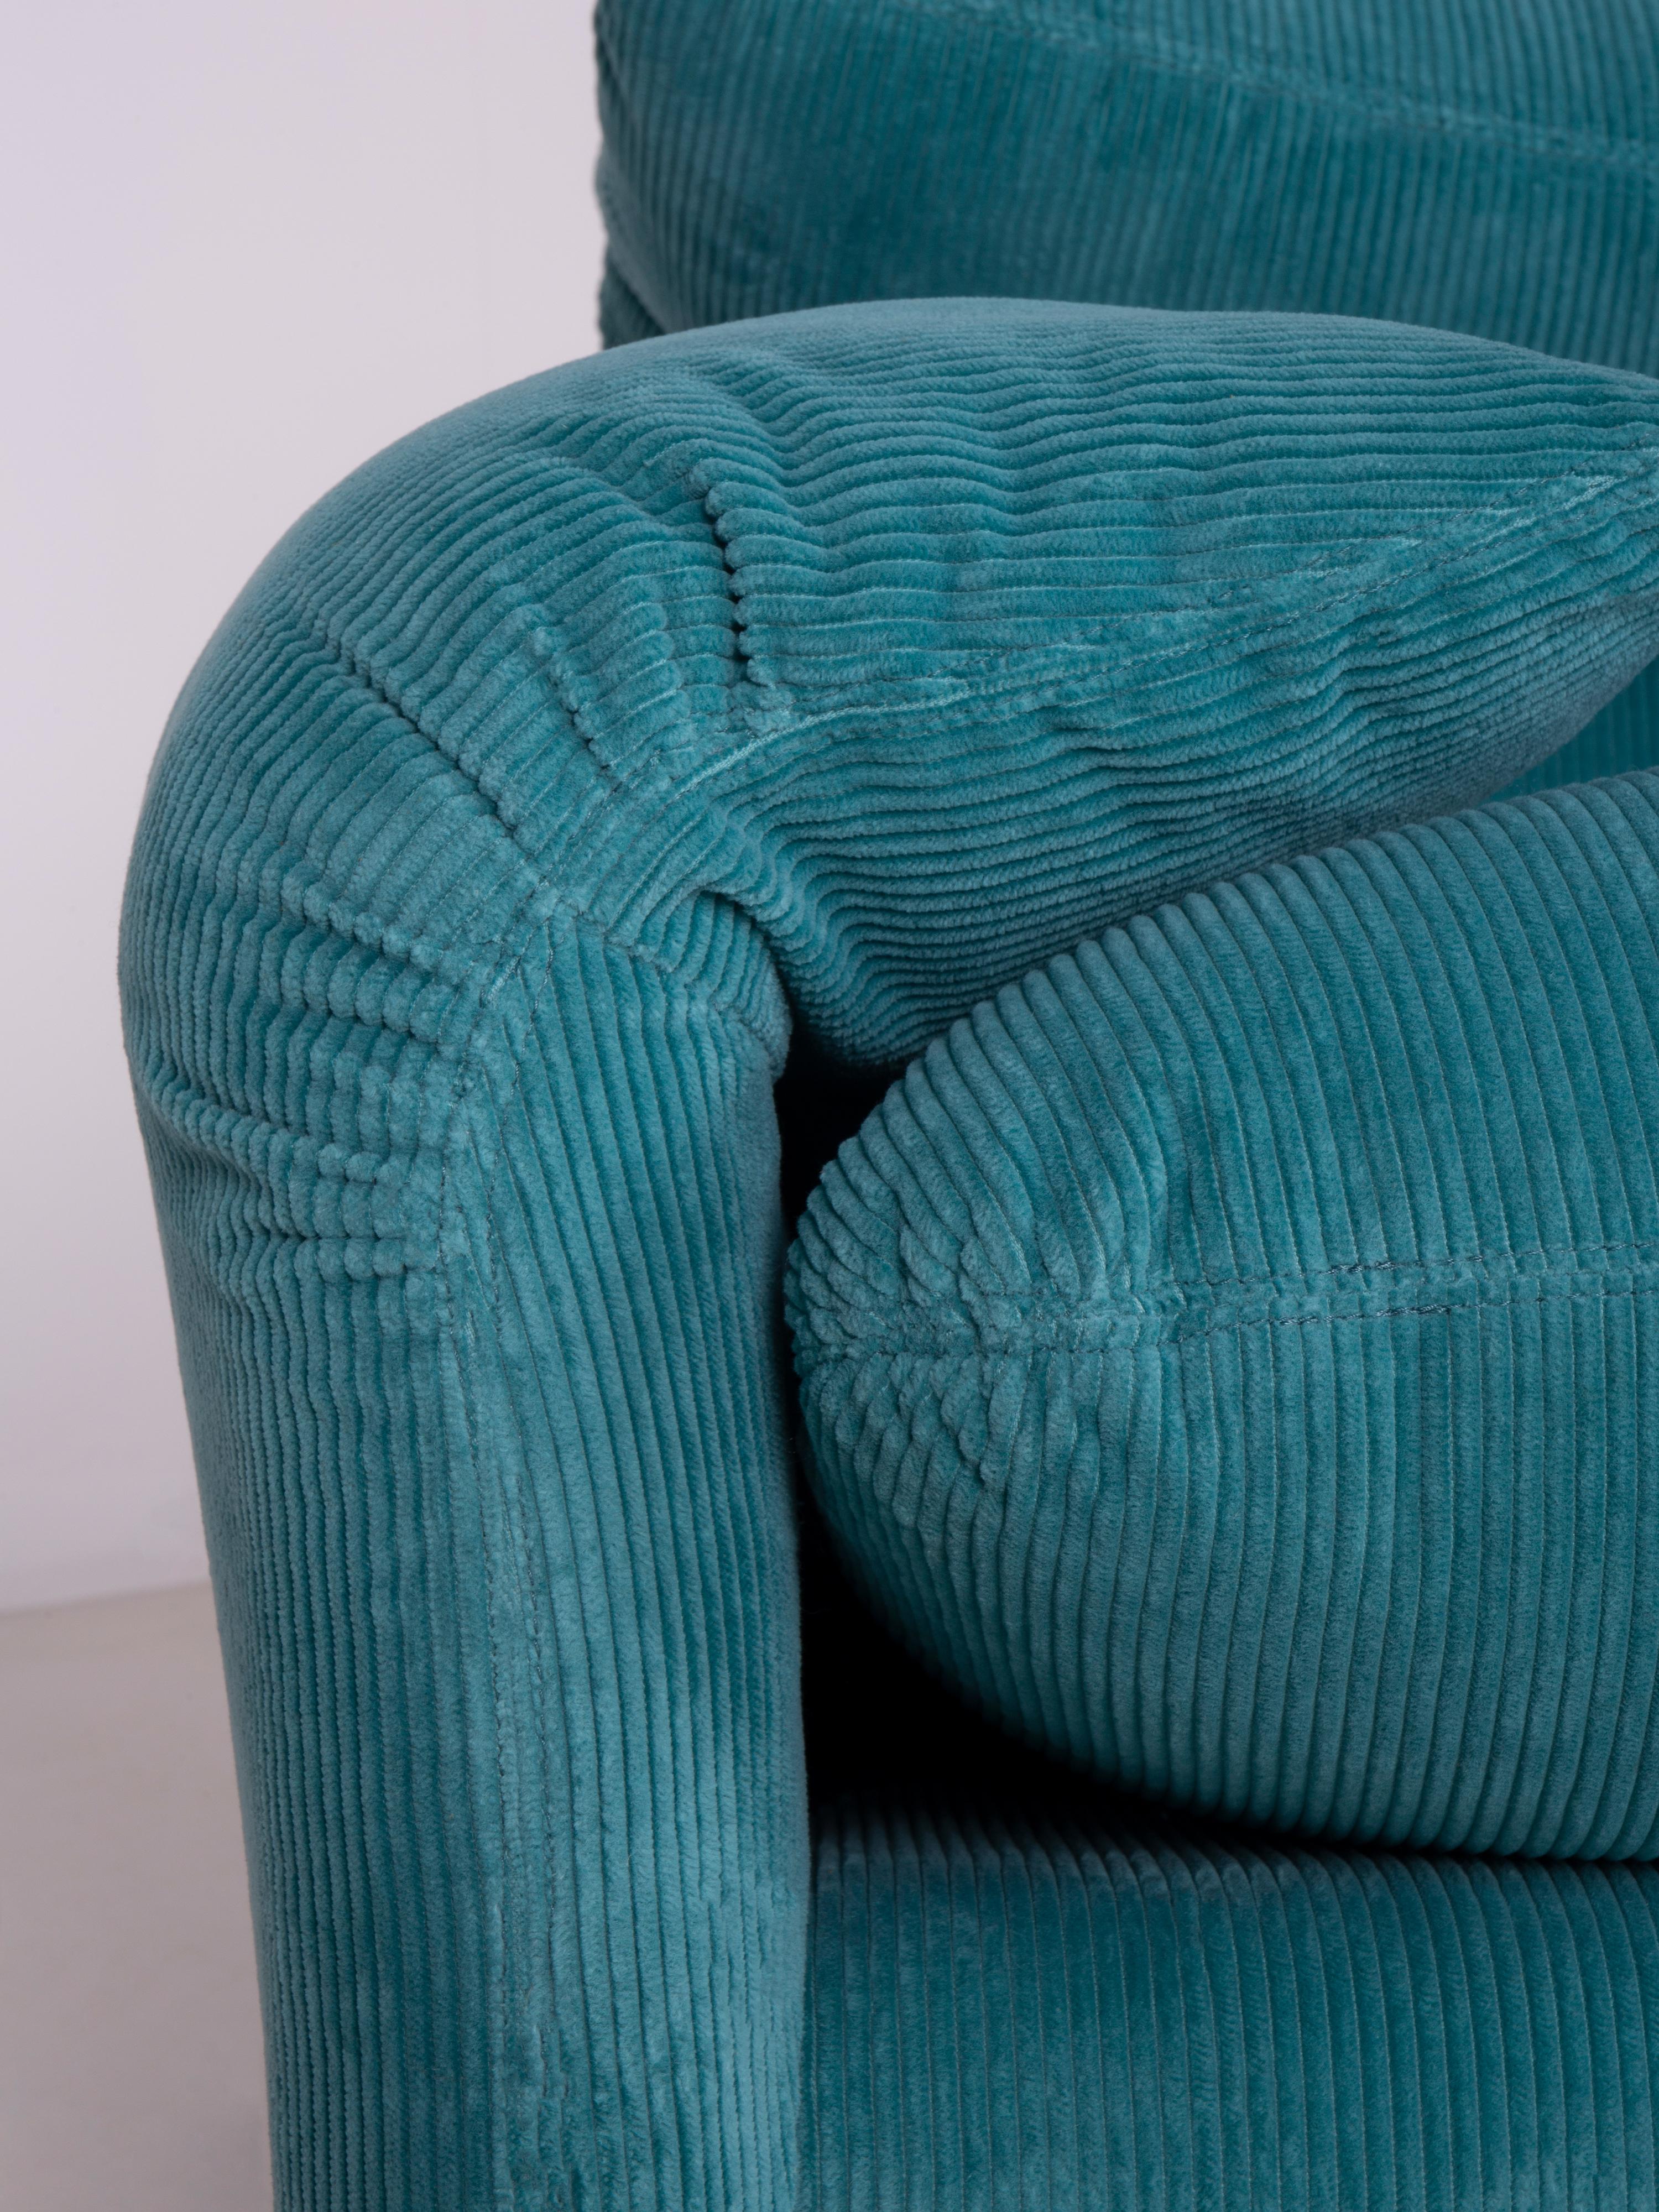 Late 20th Century Maralunga 2 Seater Sofa by Vico Magistretti Upholstery in Ocean Green Corduroy For Sale